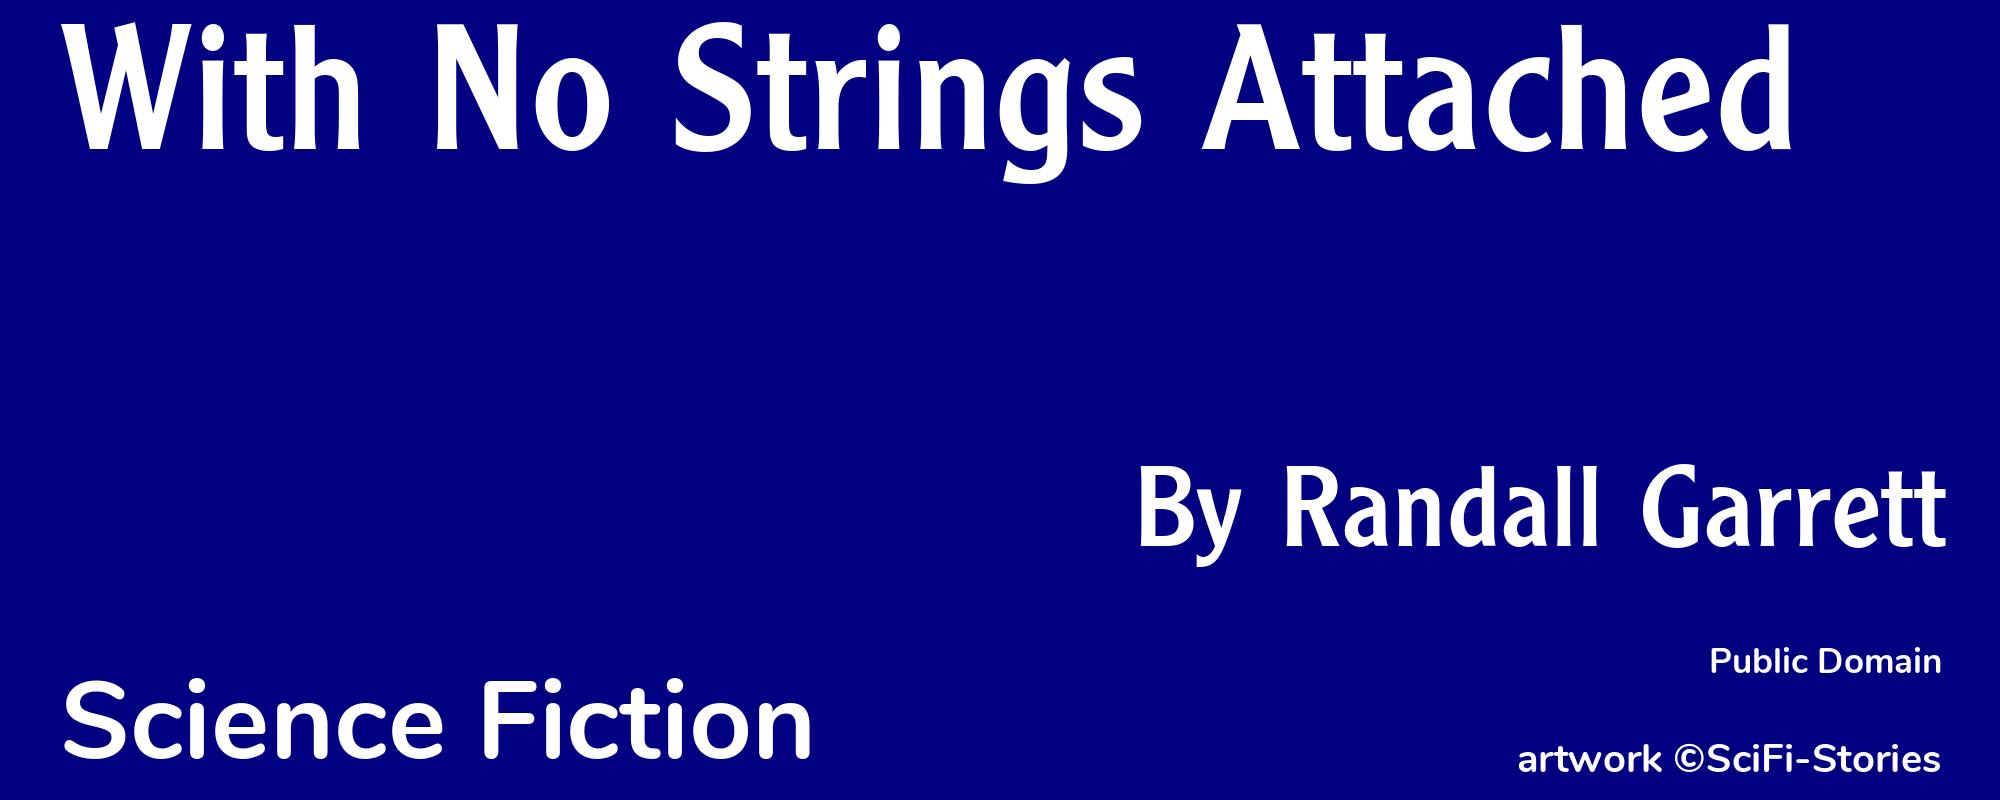 With No Strings Attached - Cover